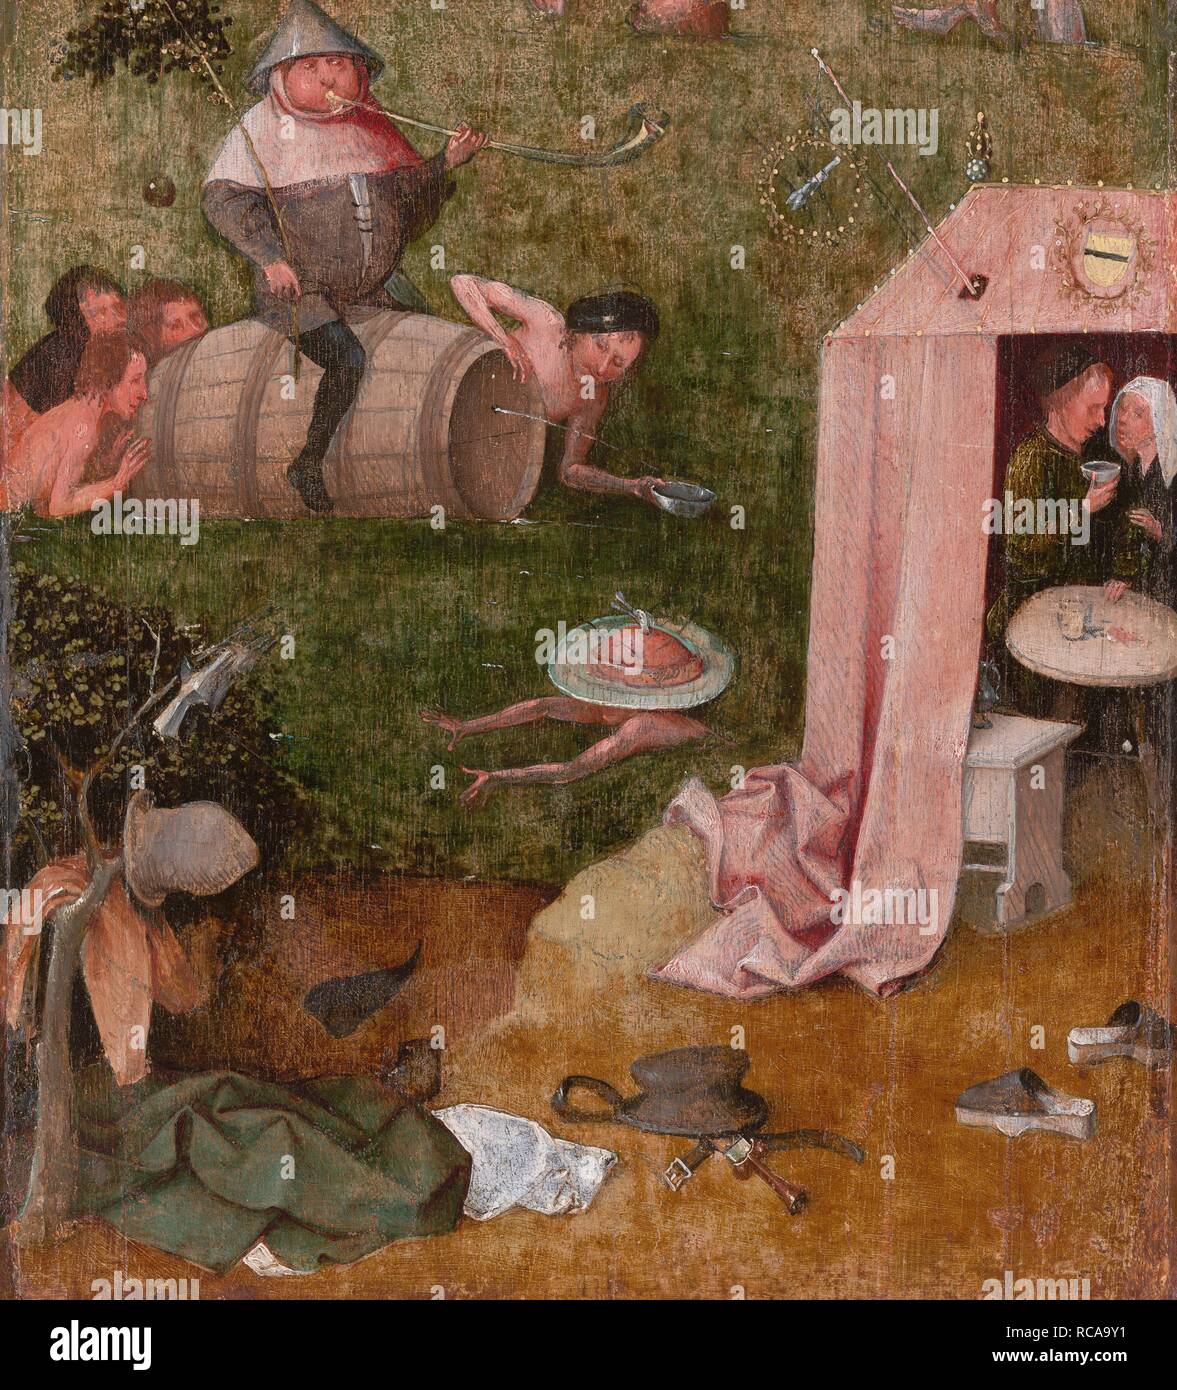 Allegory of Gluttony (Allegory of Intemperance. Allegory of Gluttony and Lust). Museum: YALE UNIVERSITY. Author: BOSCH, HIERONYMUS. Stock Photo